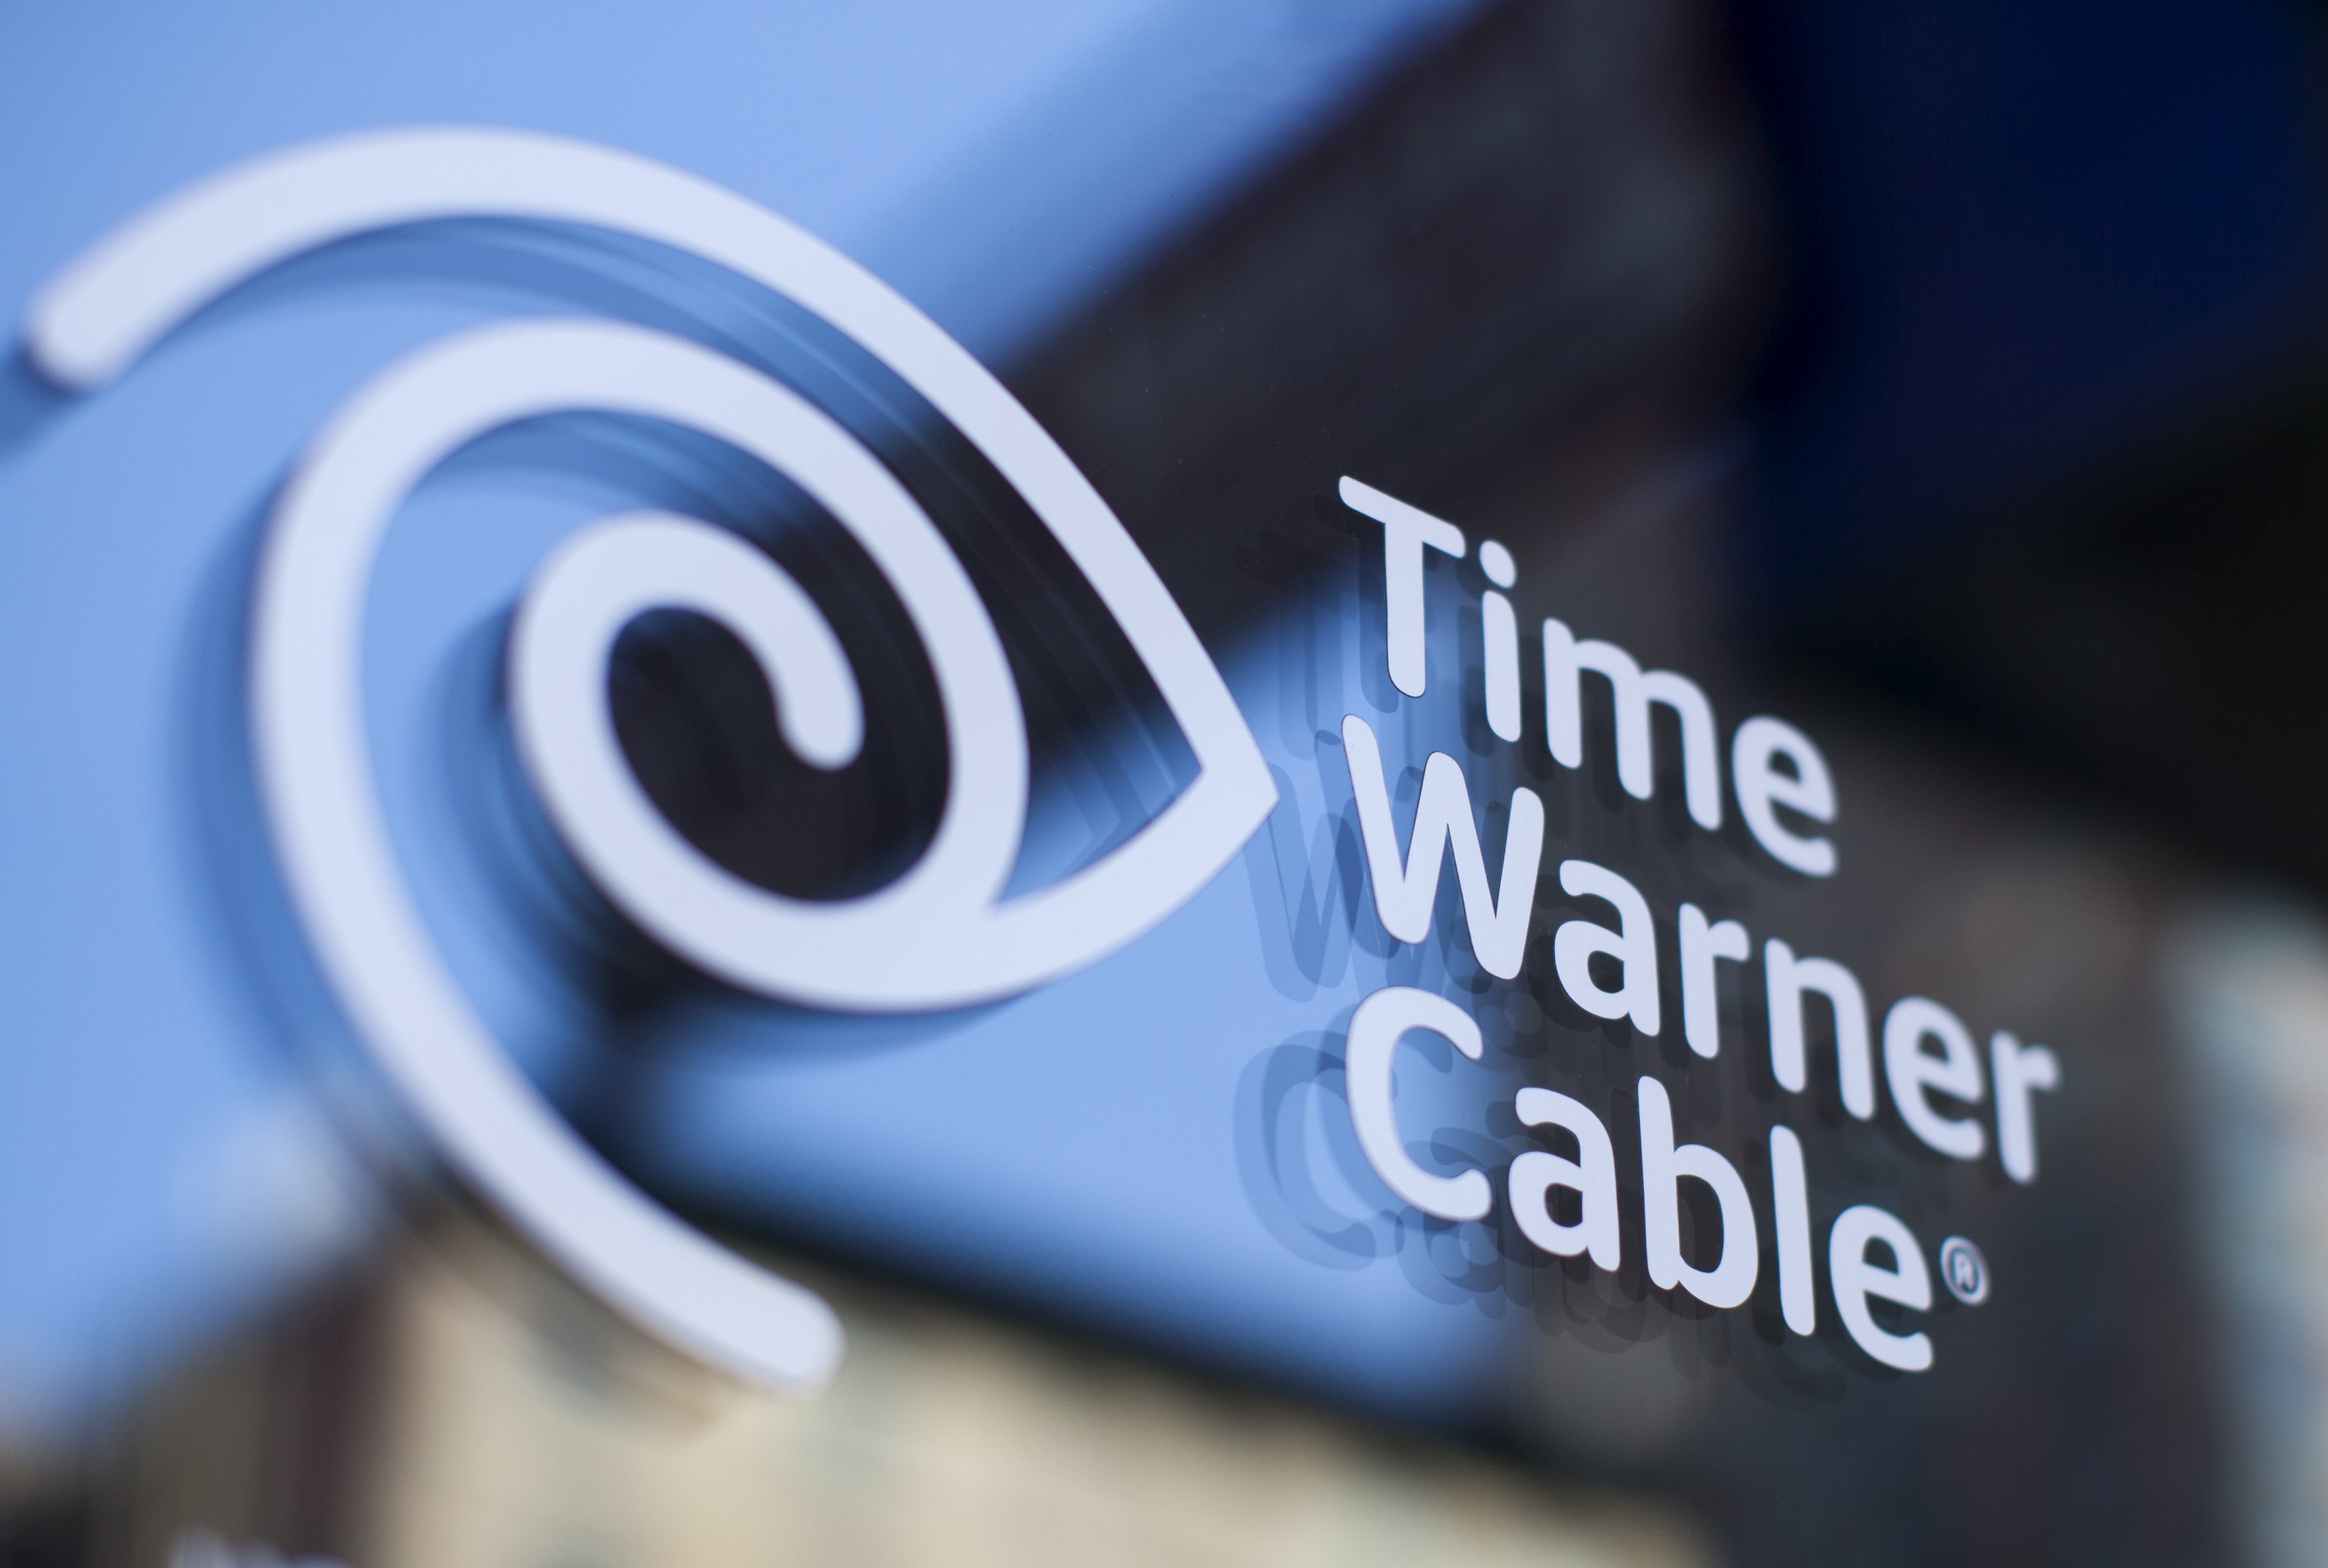 A Time Warner Cable sign and logo are seen on a Time Warner Cable store in the Manhattan borough of New York City, May 26, 2015. Charter Communications Inc, controlled by cable industry pioneer John Malone, offered to buy Time Warner Cable Inc for $56 billion, seeking to combine the No. 3 and No. 2 U.S. cable operators to compete against market leader Comcast Corp. REUTERS/Mike Segar